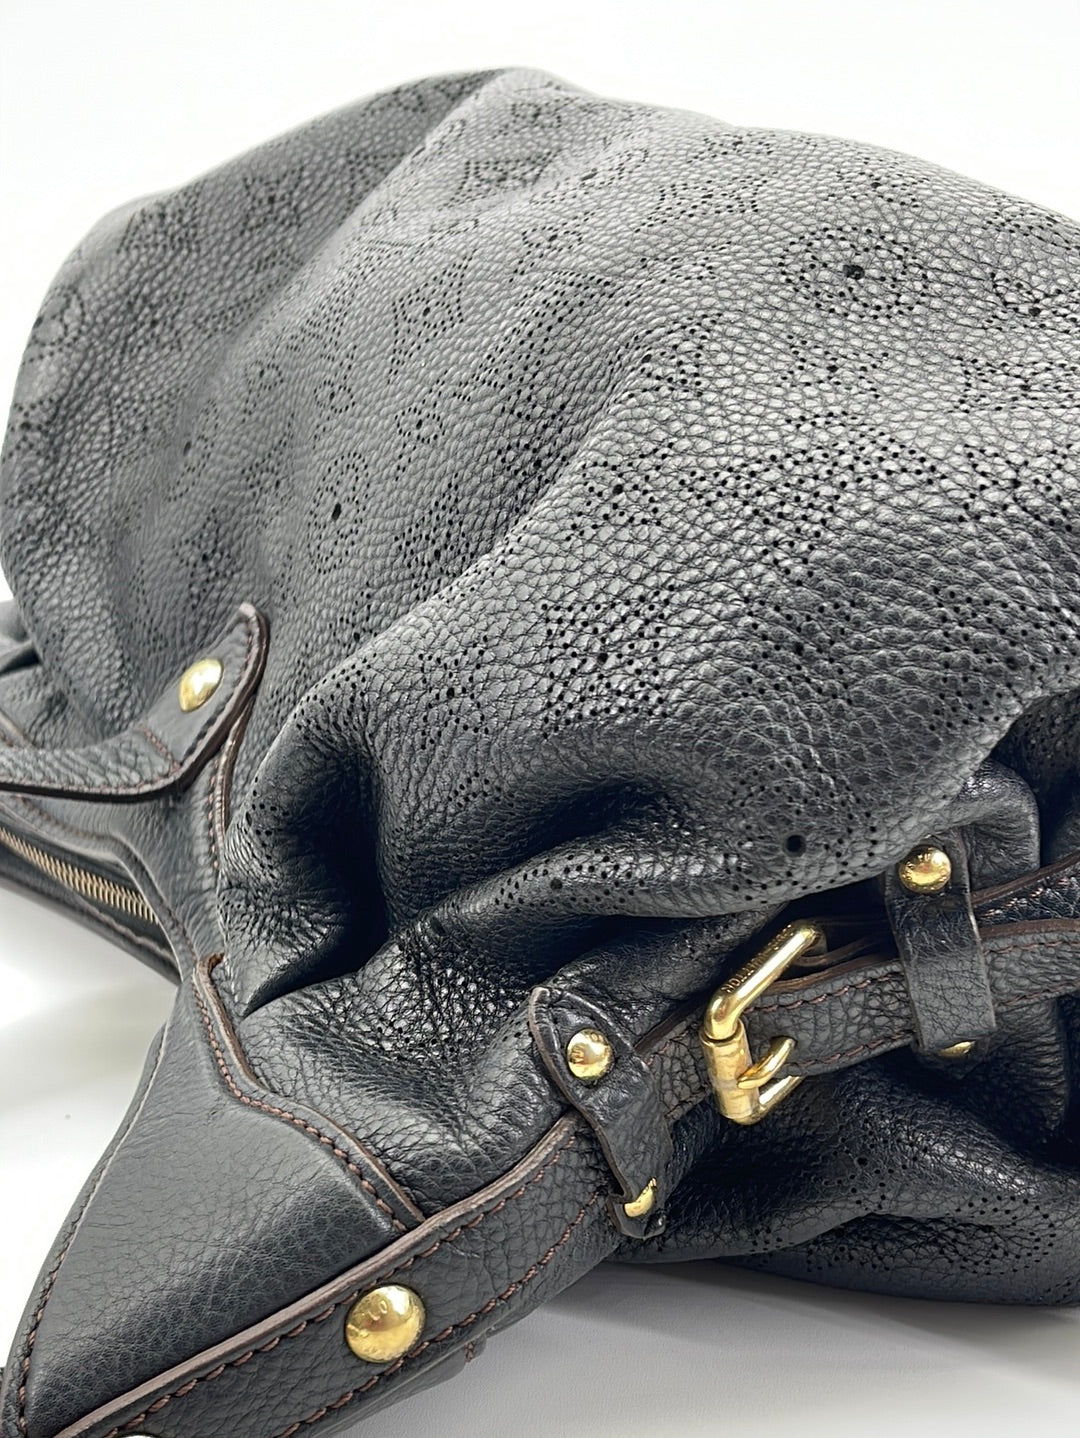 At Auction: A Louis Vuitton Mahina Leather Handbag, Black Leather Hand Bag  With Gold Tone Hard Wear. Large interior with Zipped Pocket. Please See  Photos For Condition. h32cm x w 44cm 13673